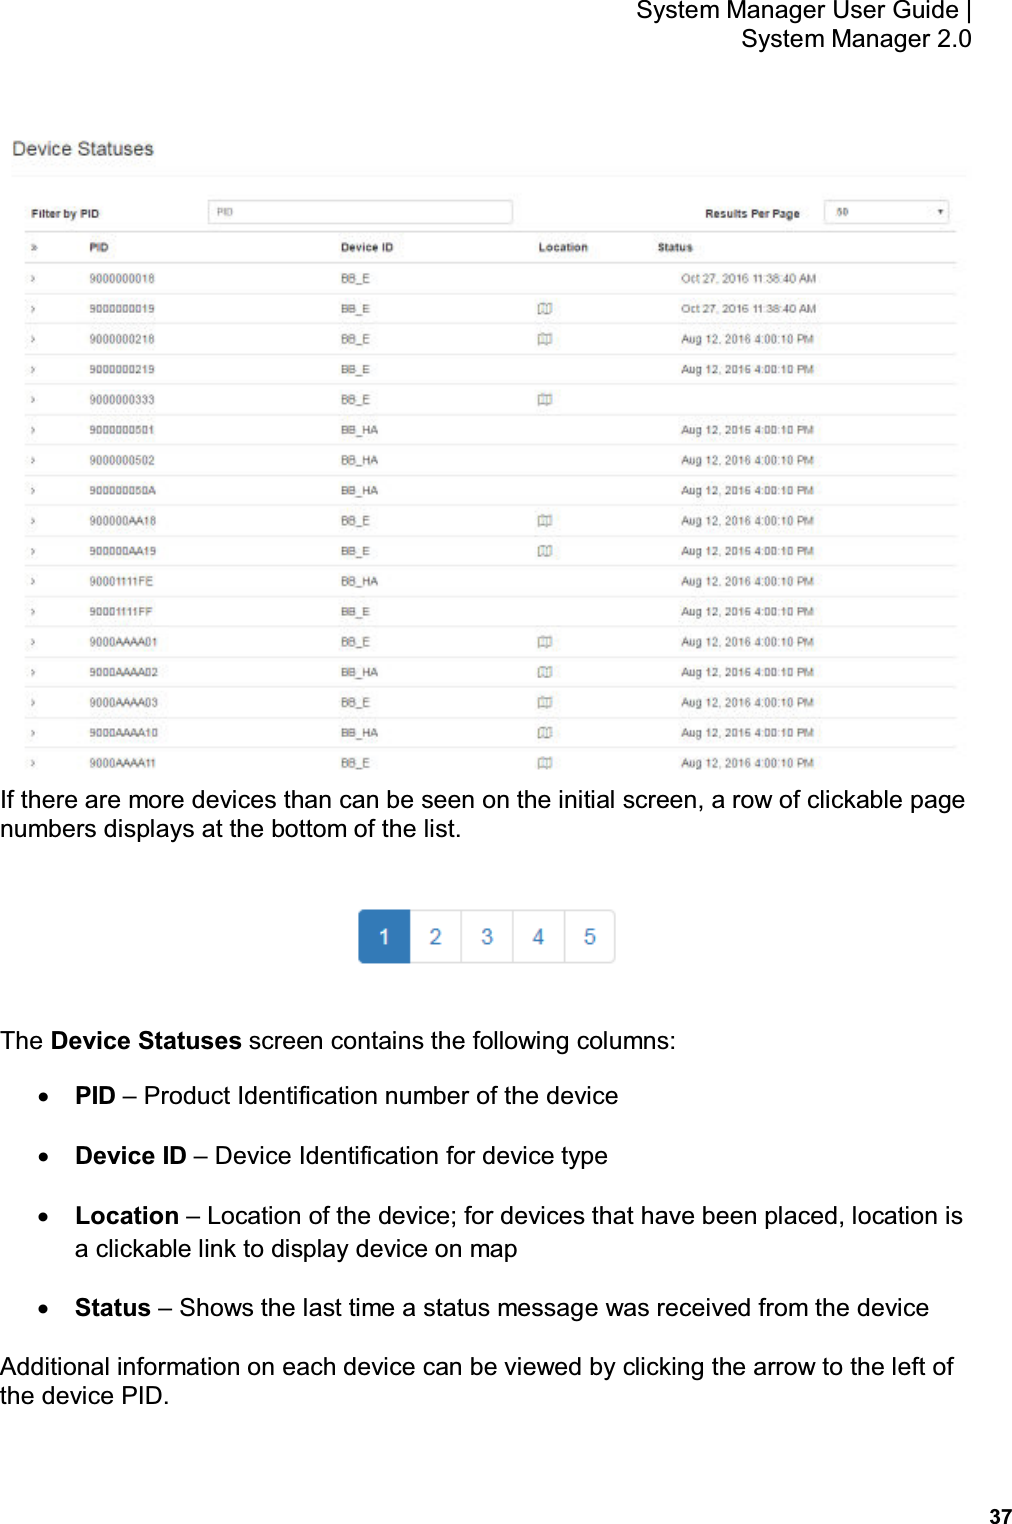           37 System Manager User Guide |  System Manager 2.0  If there are more devices than can be seen on the initial screen, a row of clickable page numbers displays at the bottom of the list.  The Device Statuses screen contains the following columns: • PID – Product Identification number of the device • Device ID – Device Identification for device type • Location – Location of the device; for devices that have been placed, location is a clickable link to display device on map • Status – Shows the last time a status message was received from the device Additional information on each device can be viewed by clicking the arrow to the left of the device PID. 